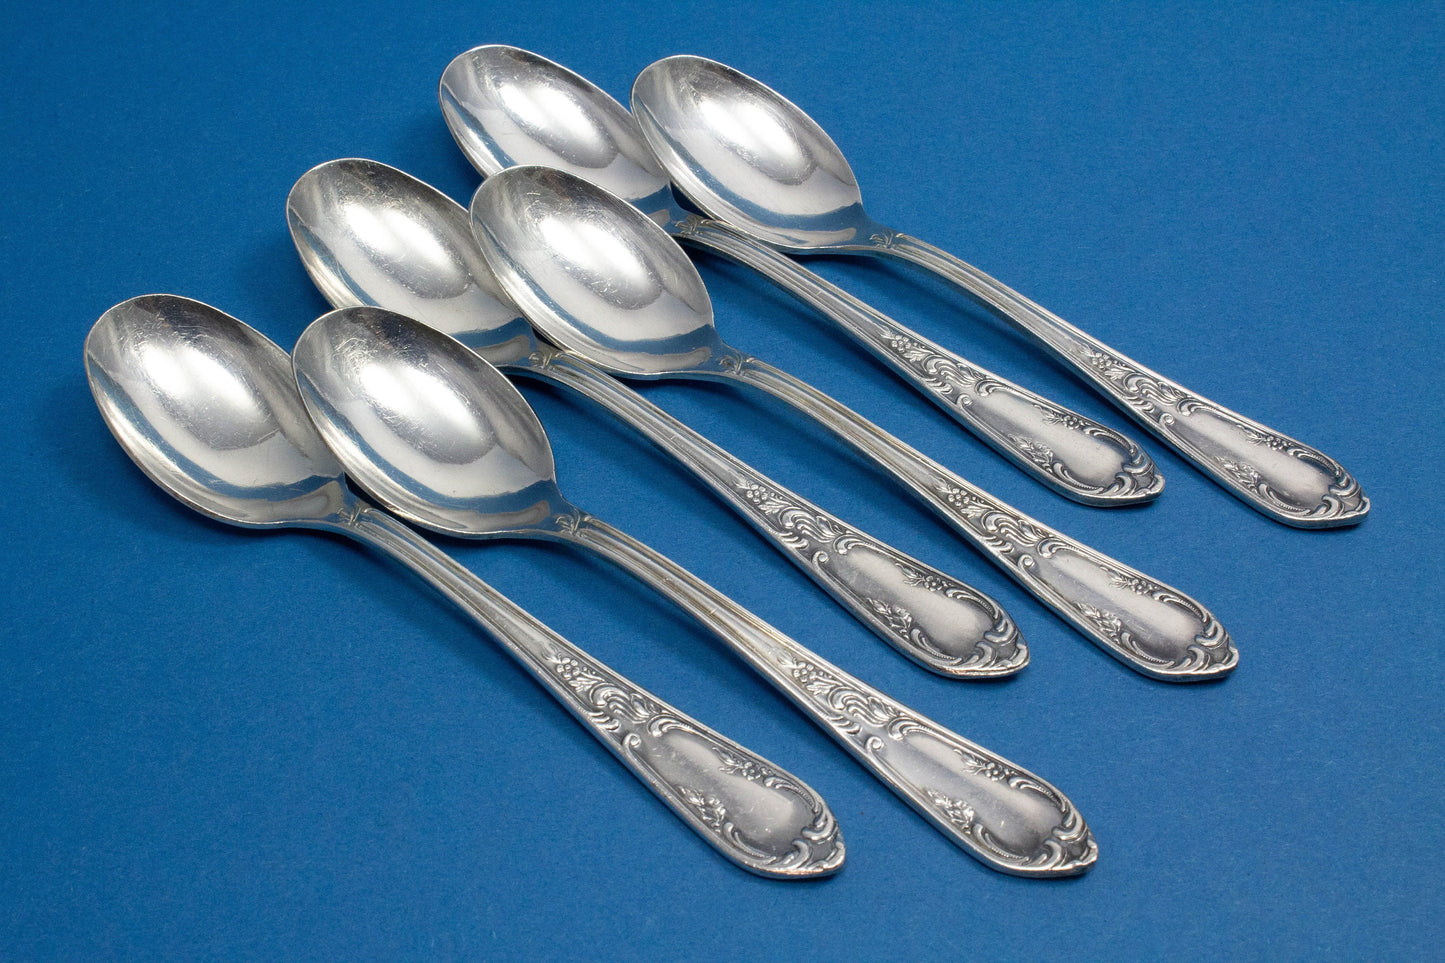 6 silver-plated mocha spoons with rococo pattern